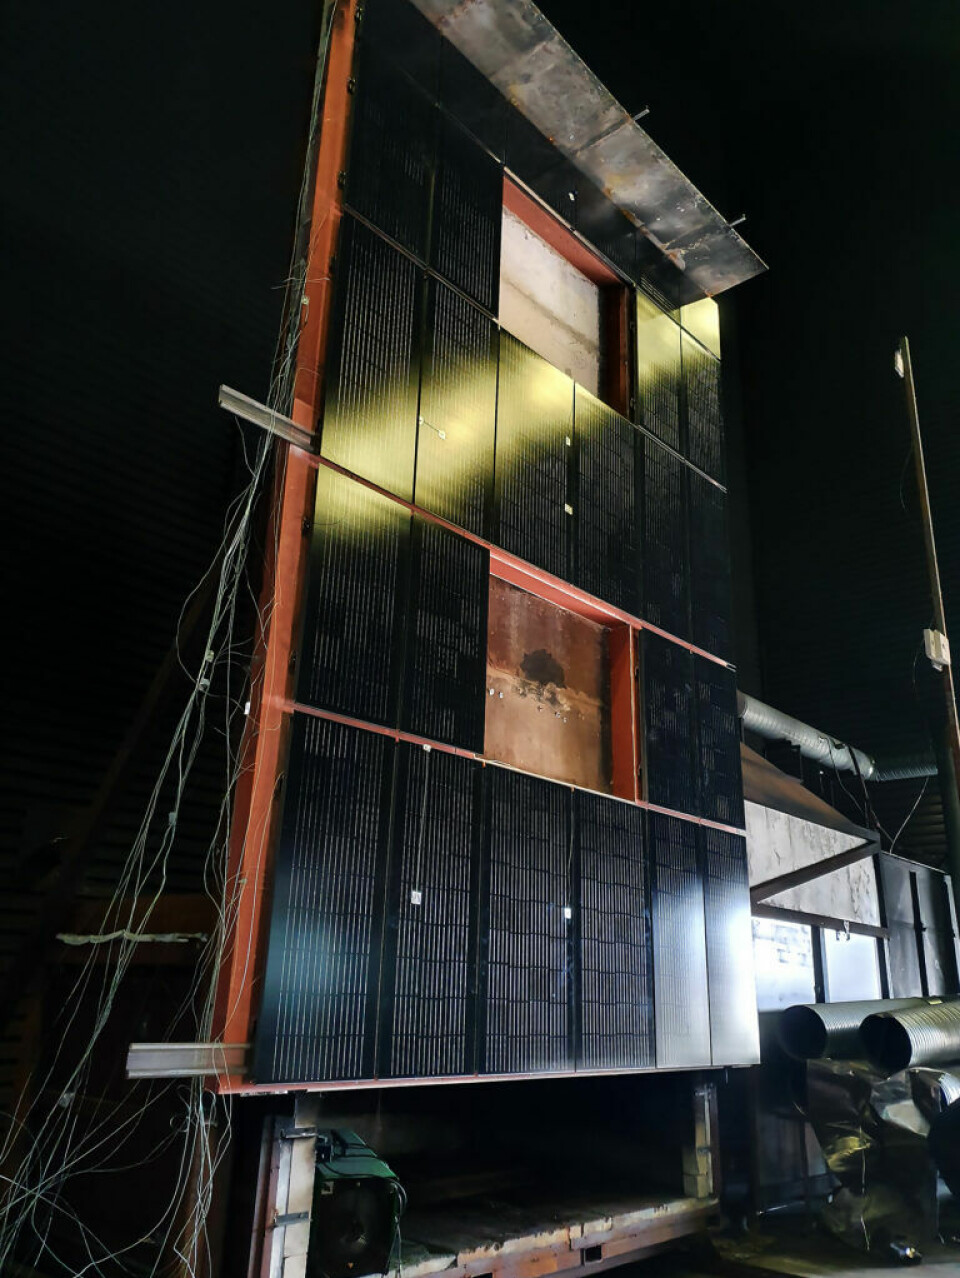 Experiments have been carried out both with vertical installations on walls and pitched systems on roof surfaces. In both cases, the solar panel modules cause the fire to spread more rapidly.